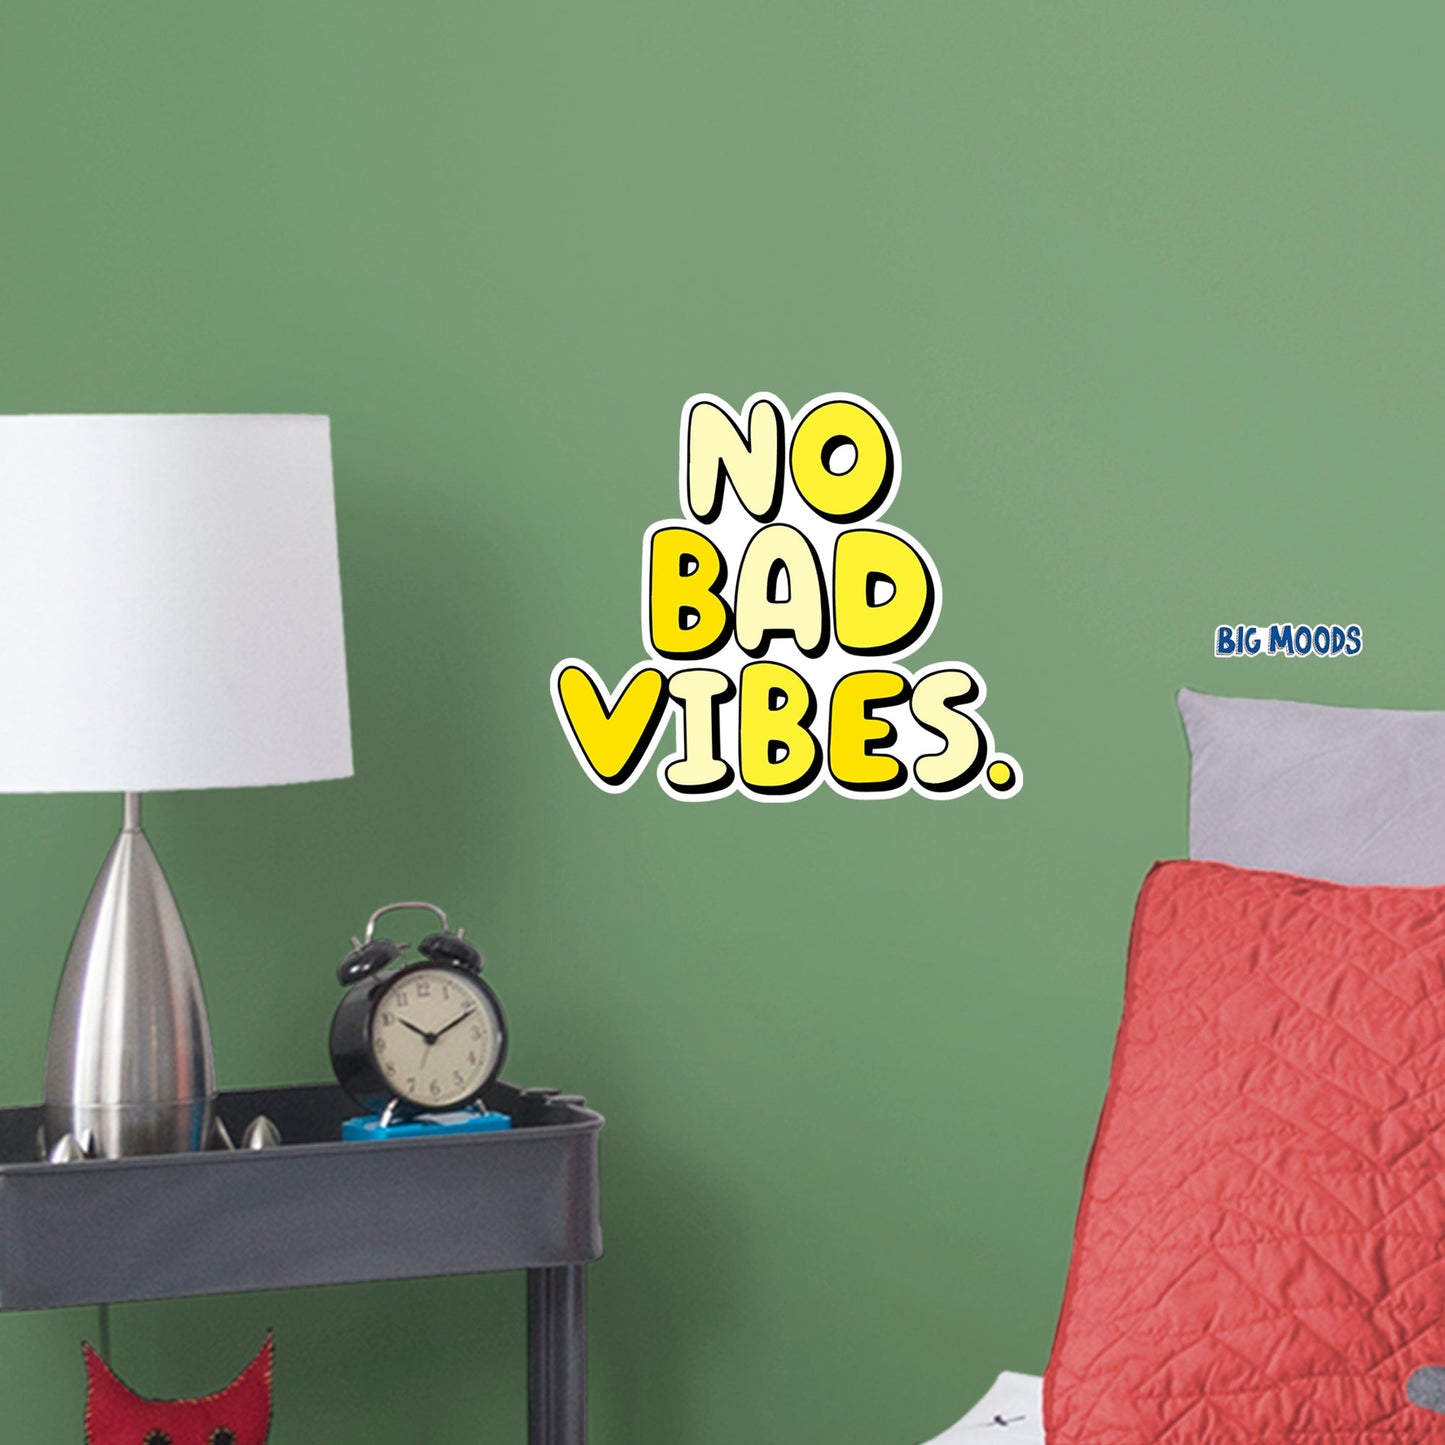 No Bad Vibes (Yellow)        - Officially Licensed Big Moods Removable     Adhesive Decal